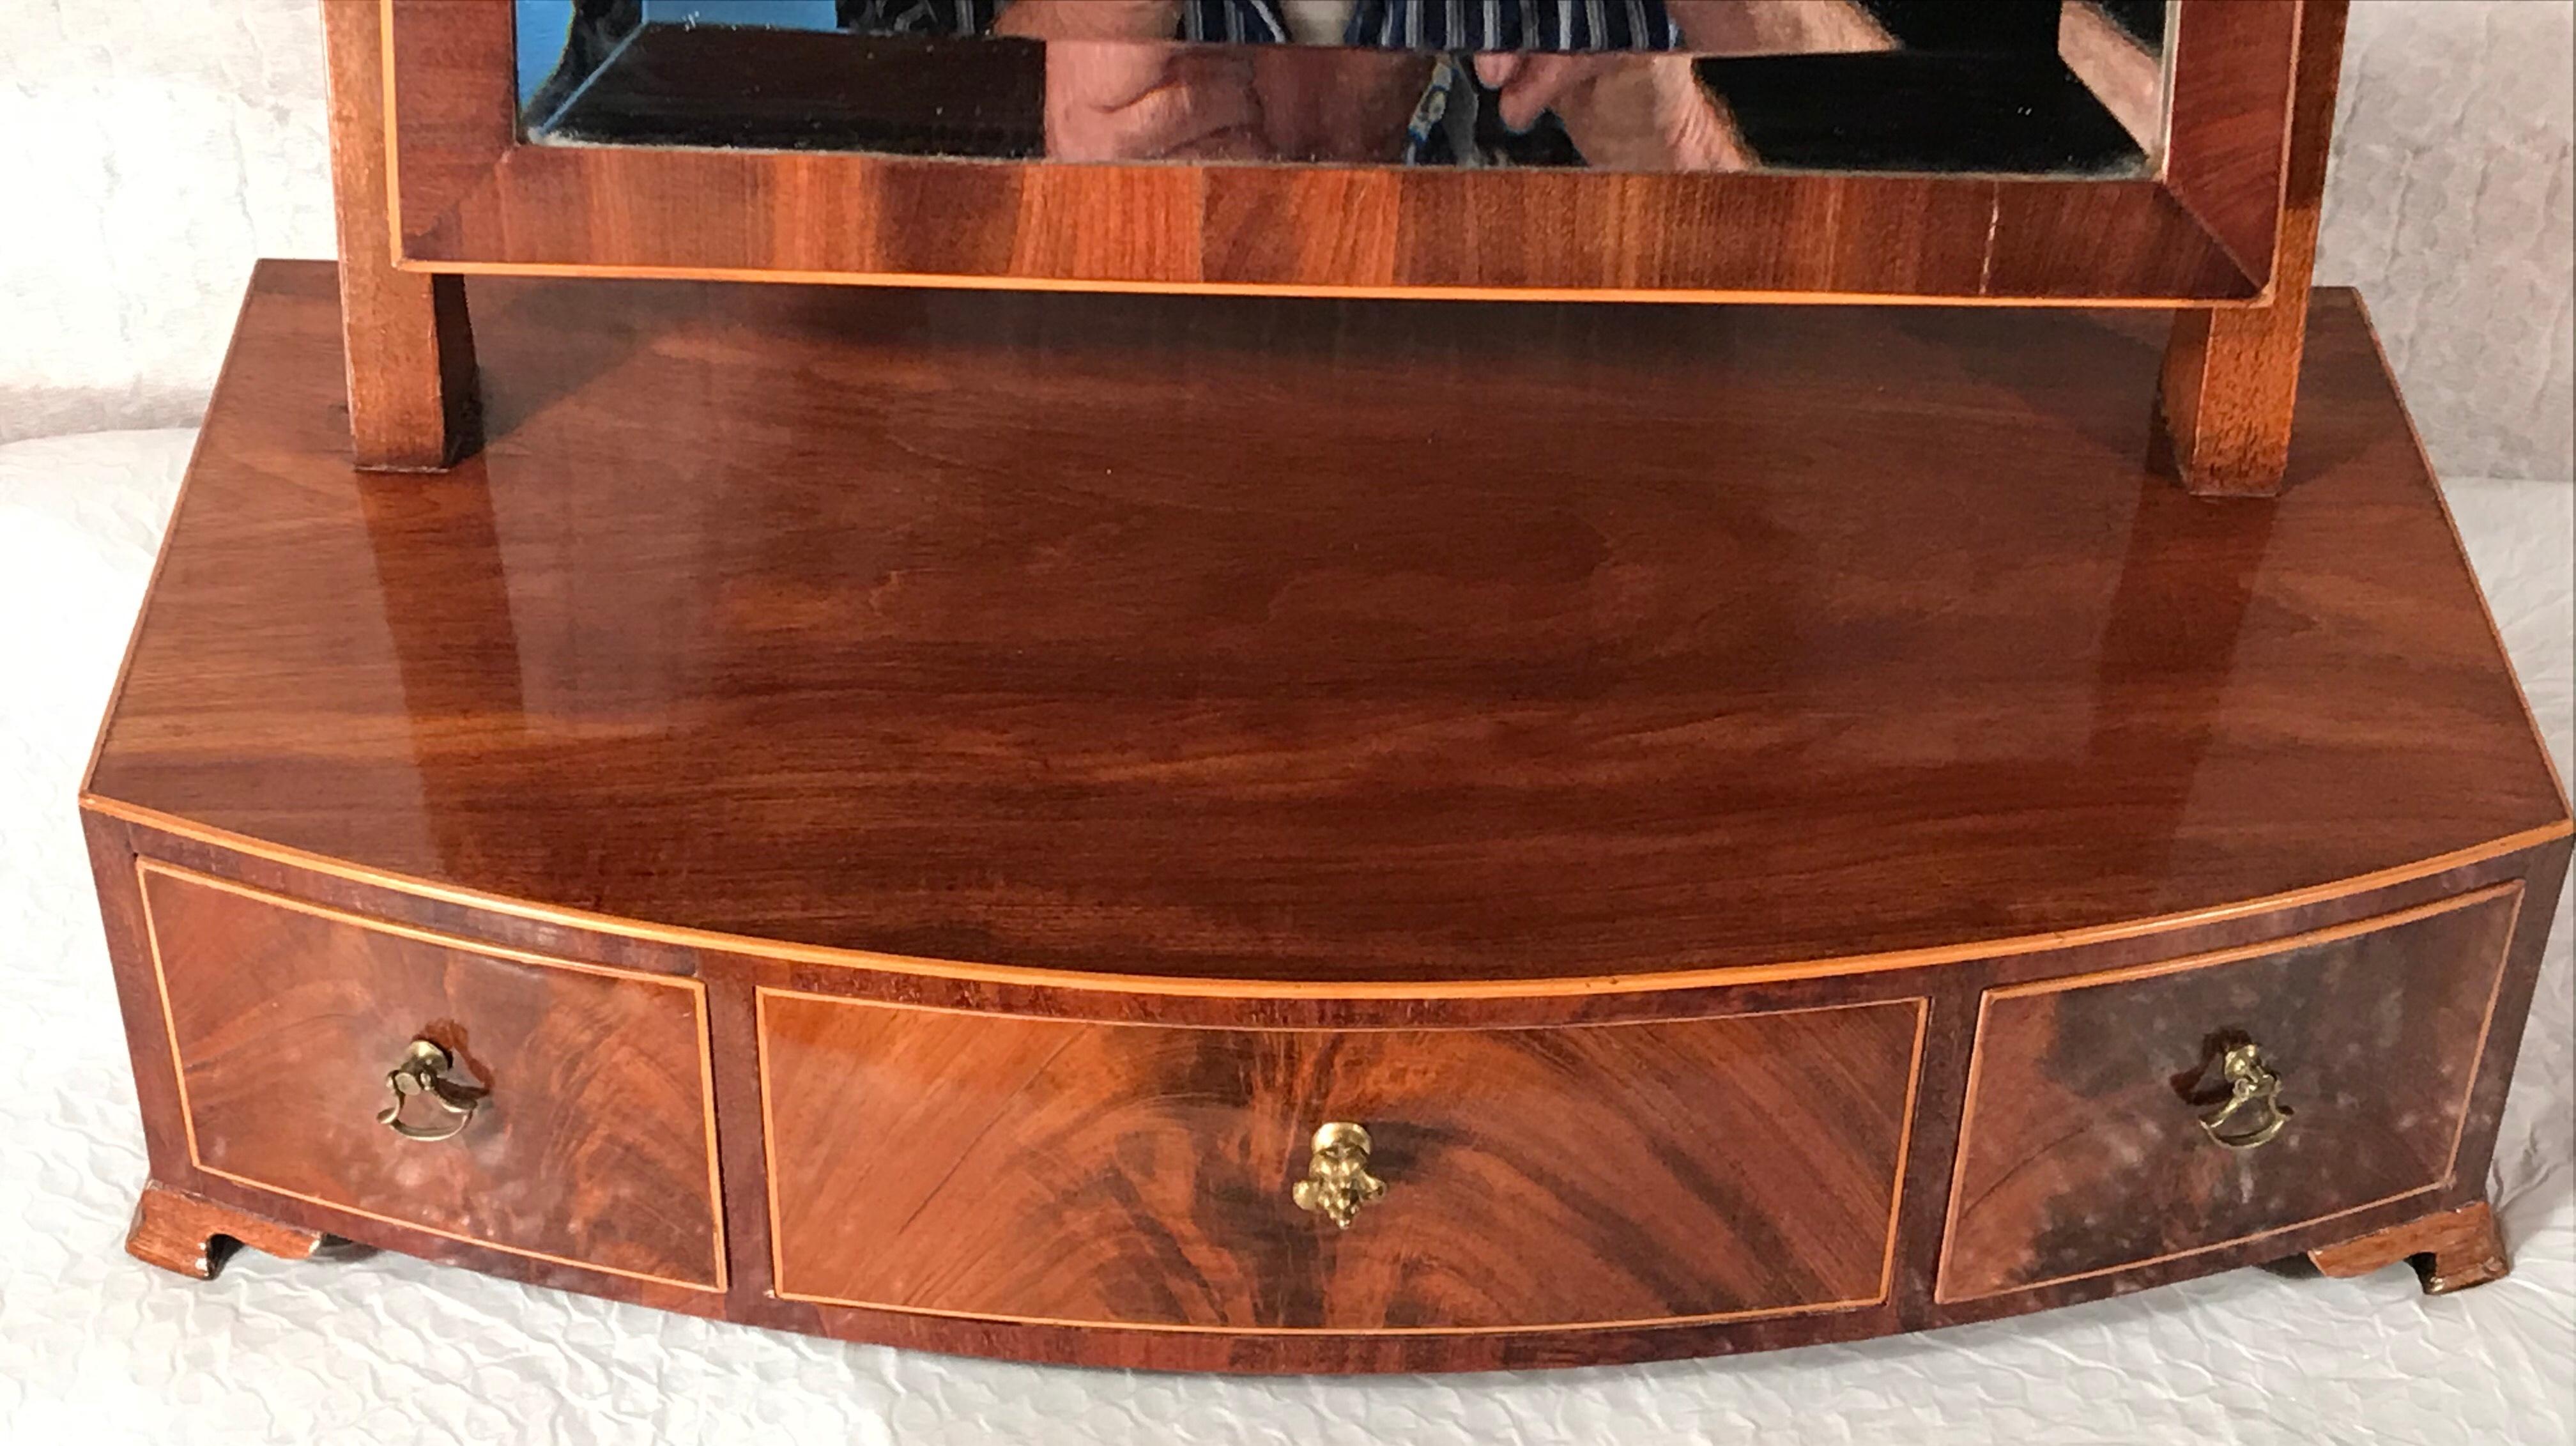 This Biedermeier bow front dressing table mirror has three drawers. It is embellished with mahogany veneer and ash inlays. The mirror has its original mirror glass. It dates back to around 1825 and comes from Berlin in Germany. It is a very elegant